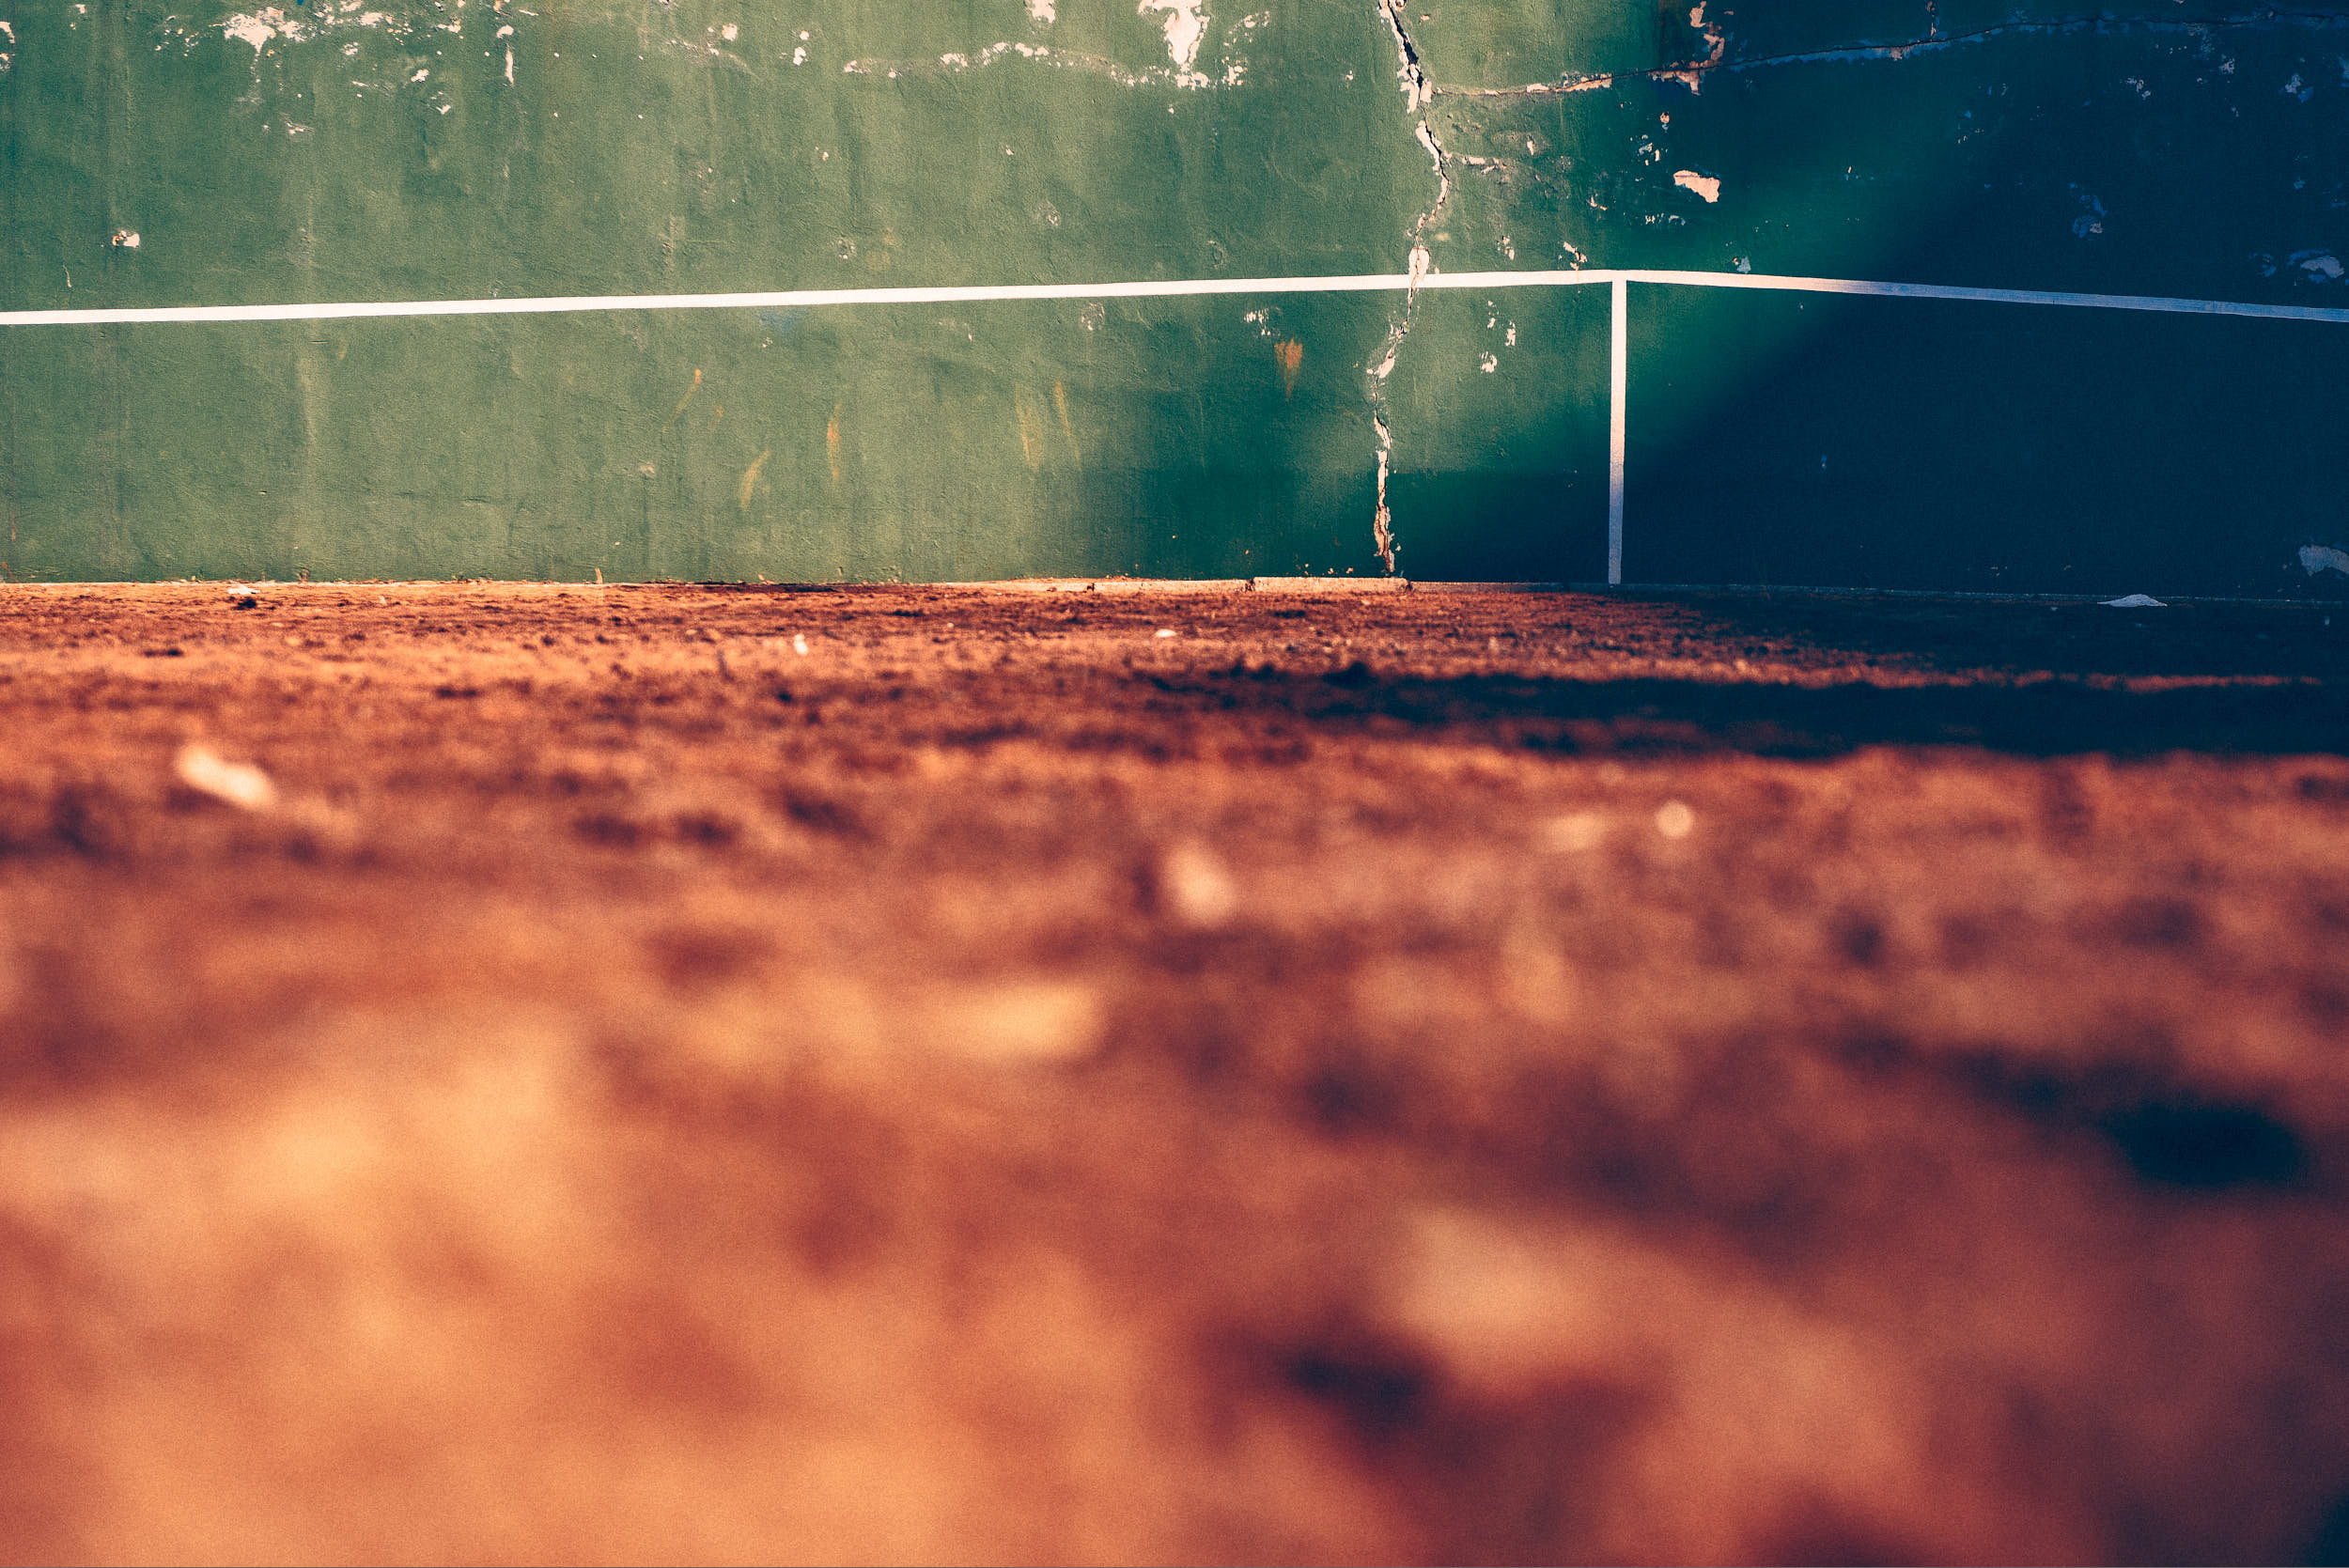 Minimalistic photography: green tennis practice wall with orange clay in the foreground.